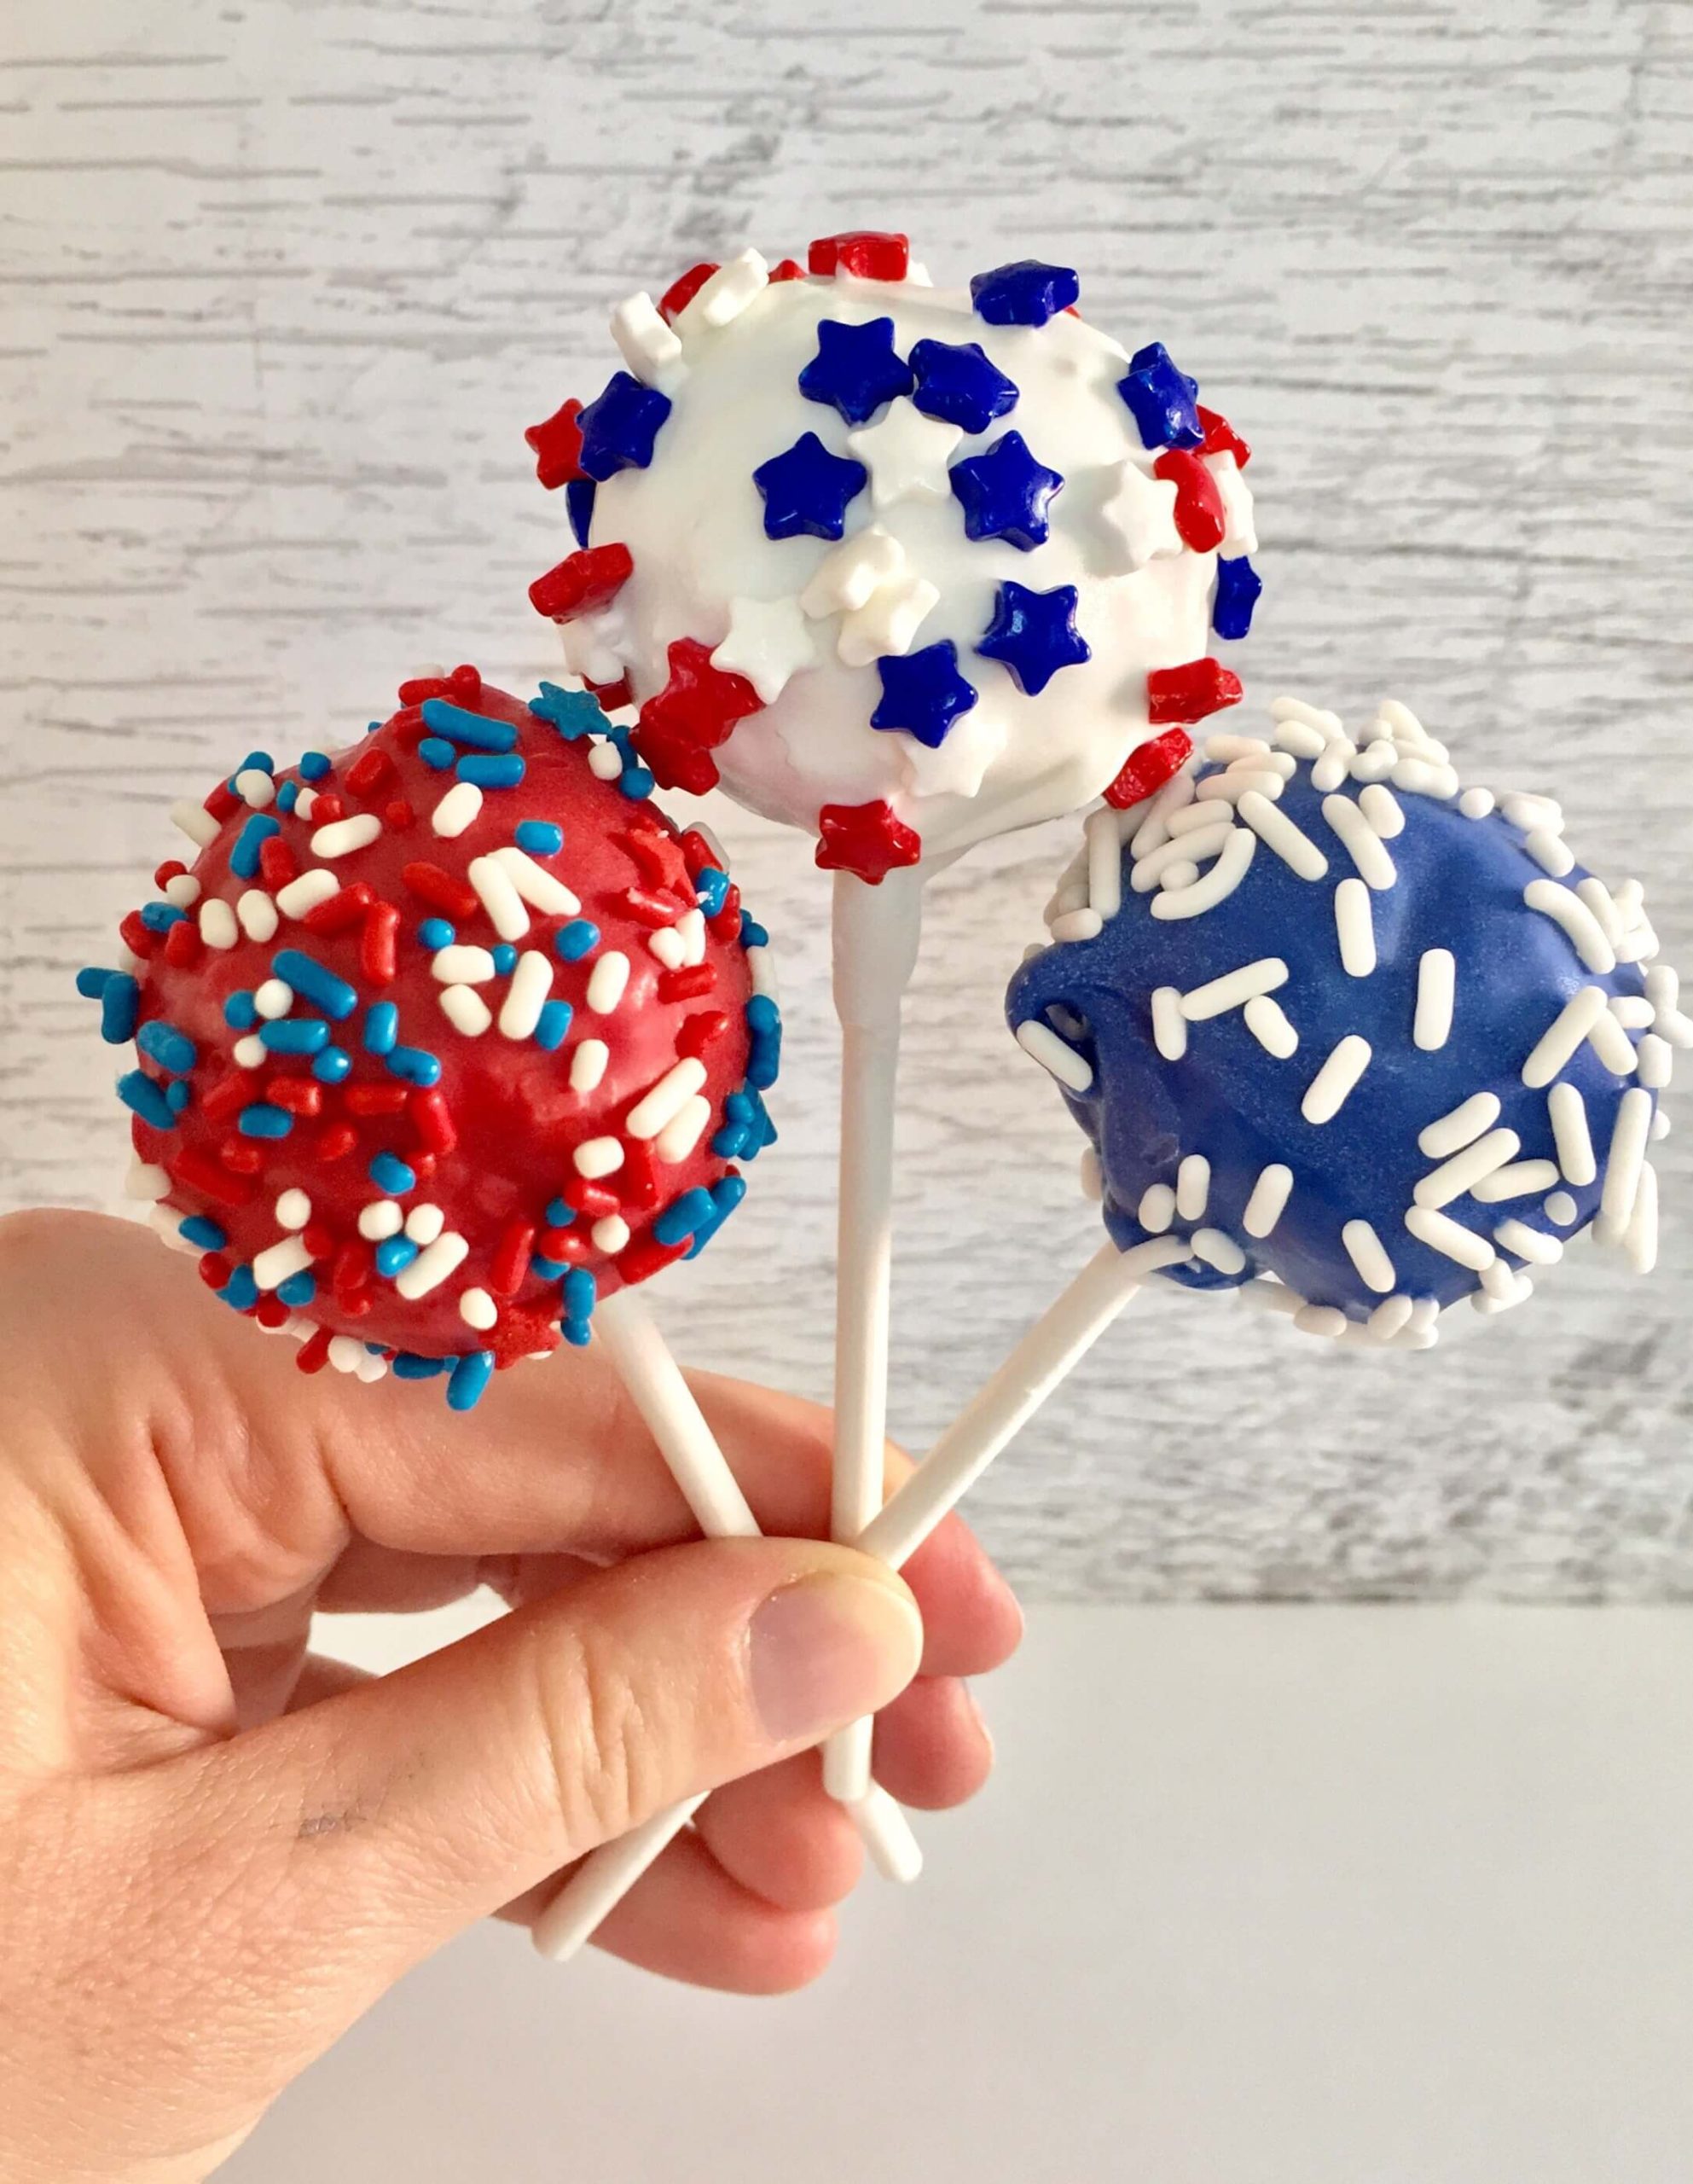 Foolproof Cake Pops via Happy Life Blogspot. These 22 festive and fun 4th of July party food ideas are guaranteed to impress everyone! They are perfect for a large crowd and even kids and adults will love. Find appetizers, BBQ, desserts, and other red, white and blue recipe ideas here!